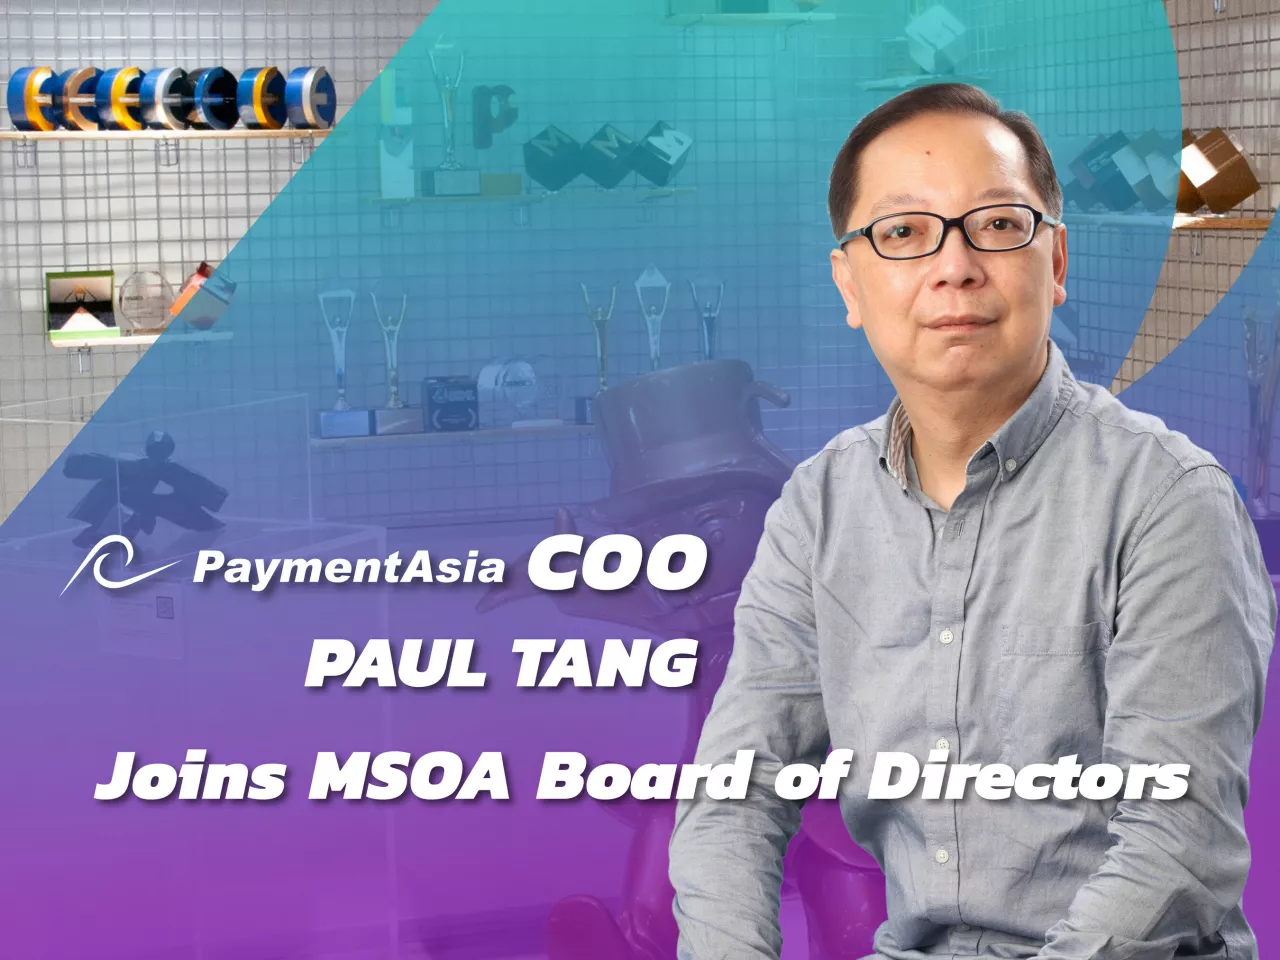 Paul Tang, COO of Payment Asia, Joins MSOA Board of Directors